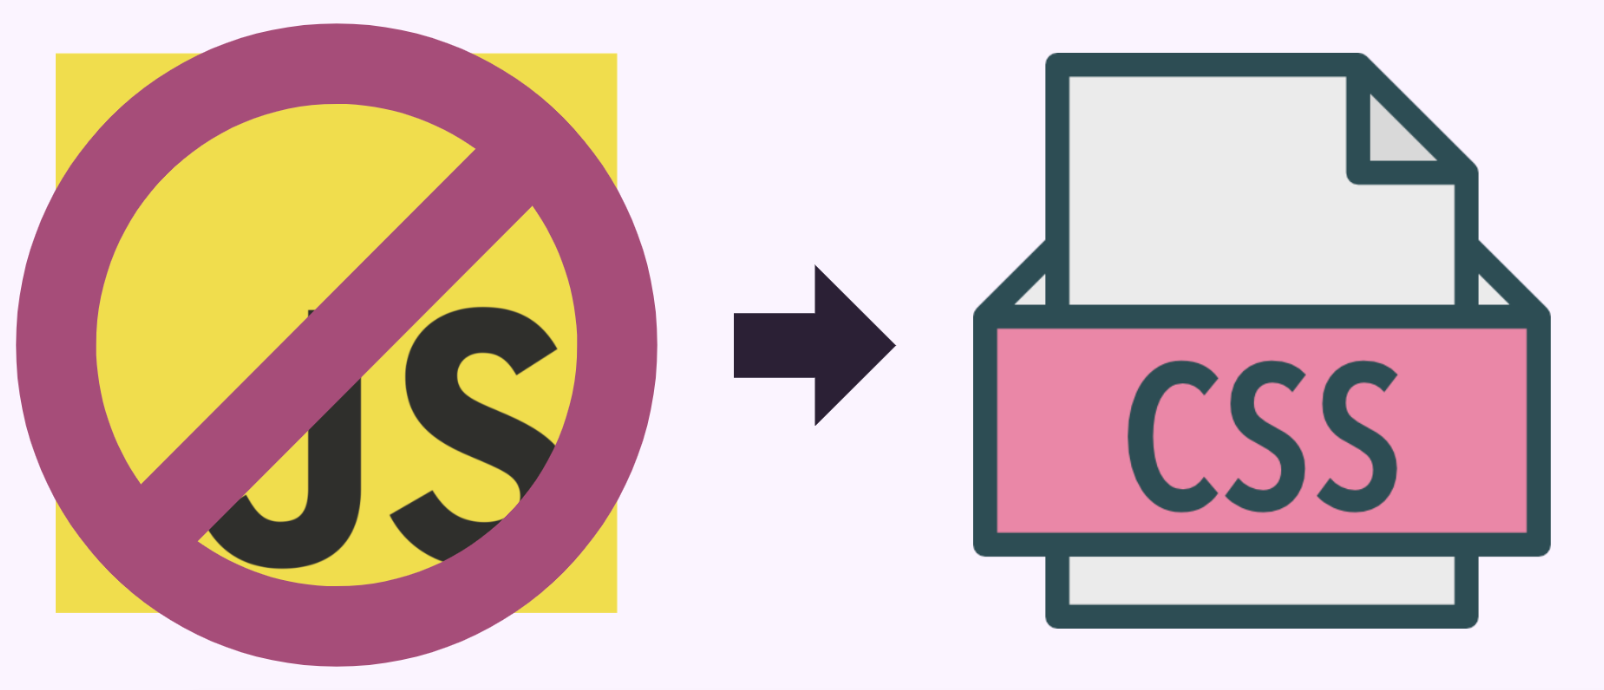 crossed out JavaScript icon transitioning to CSS